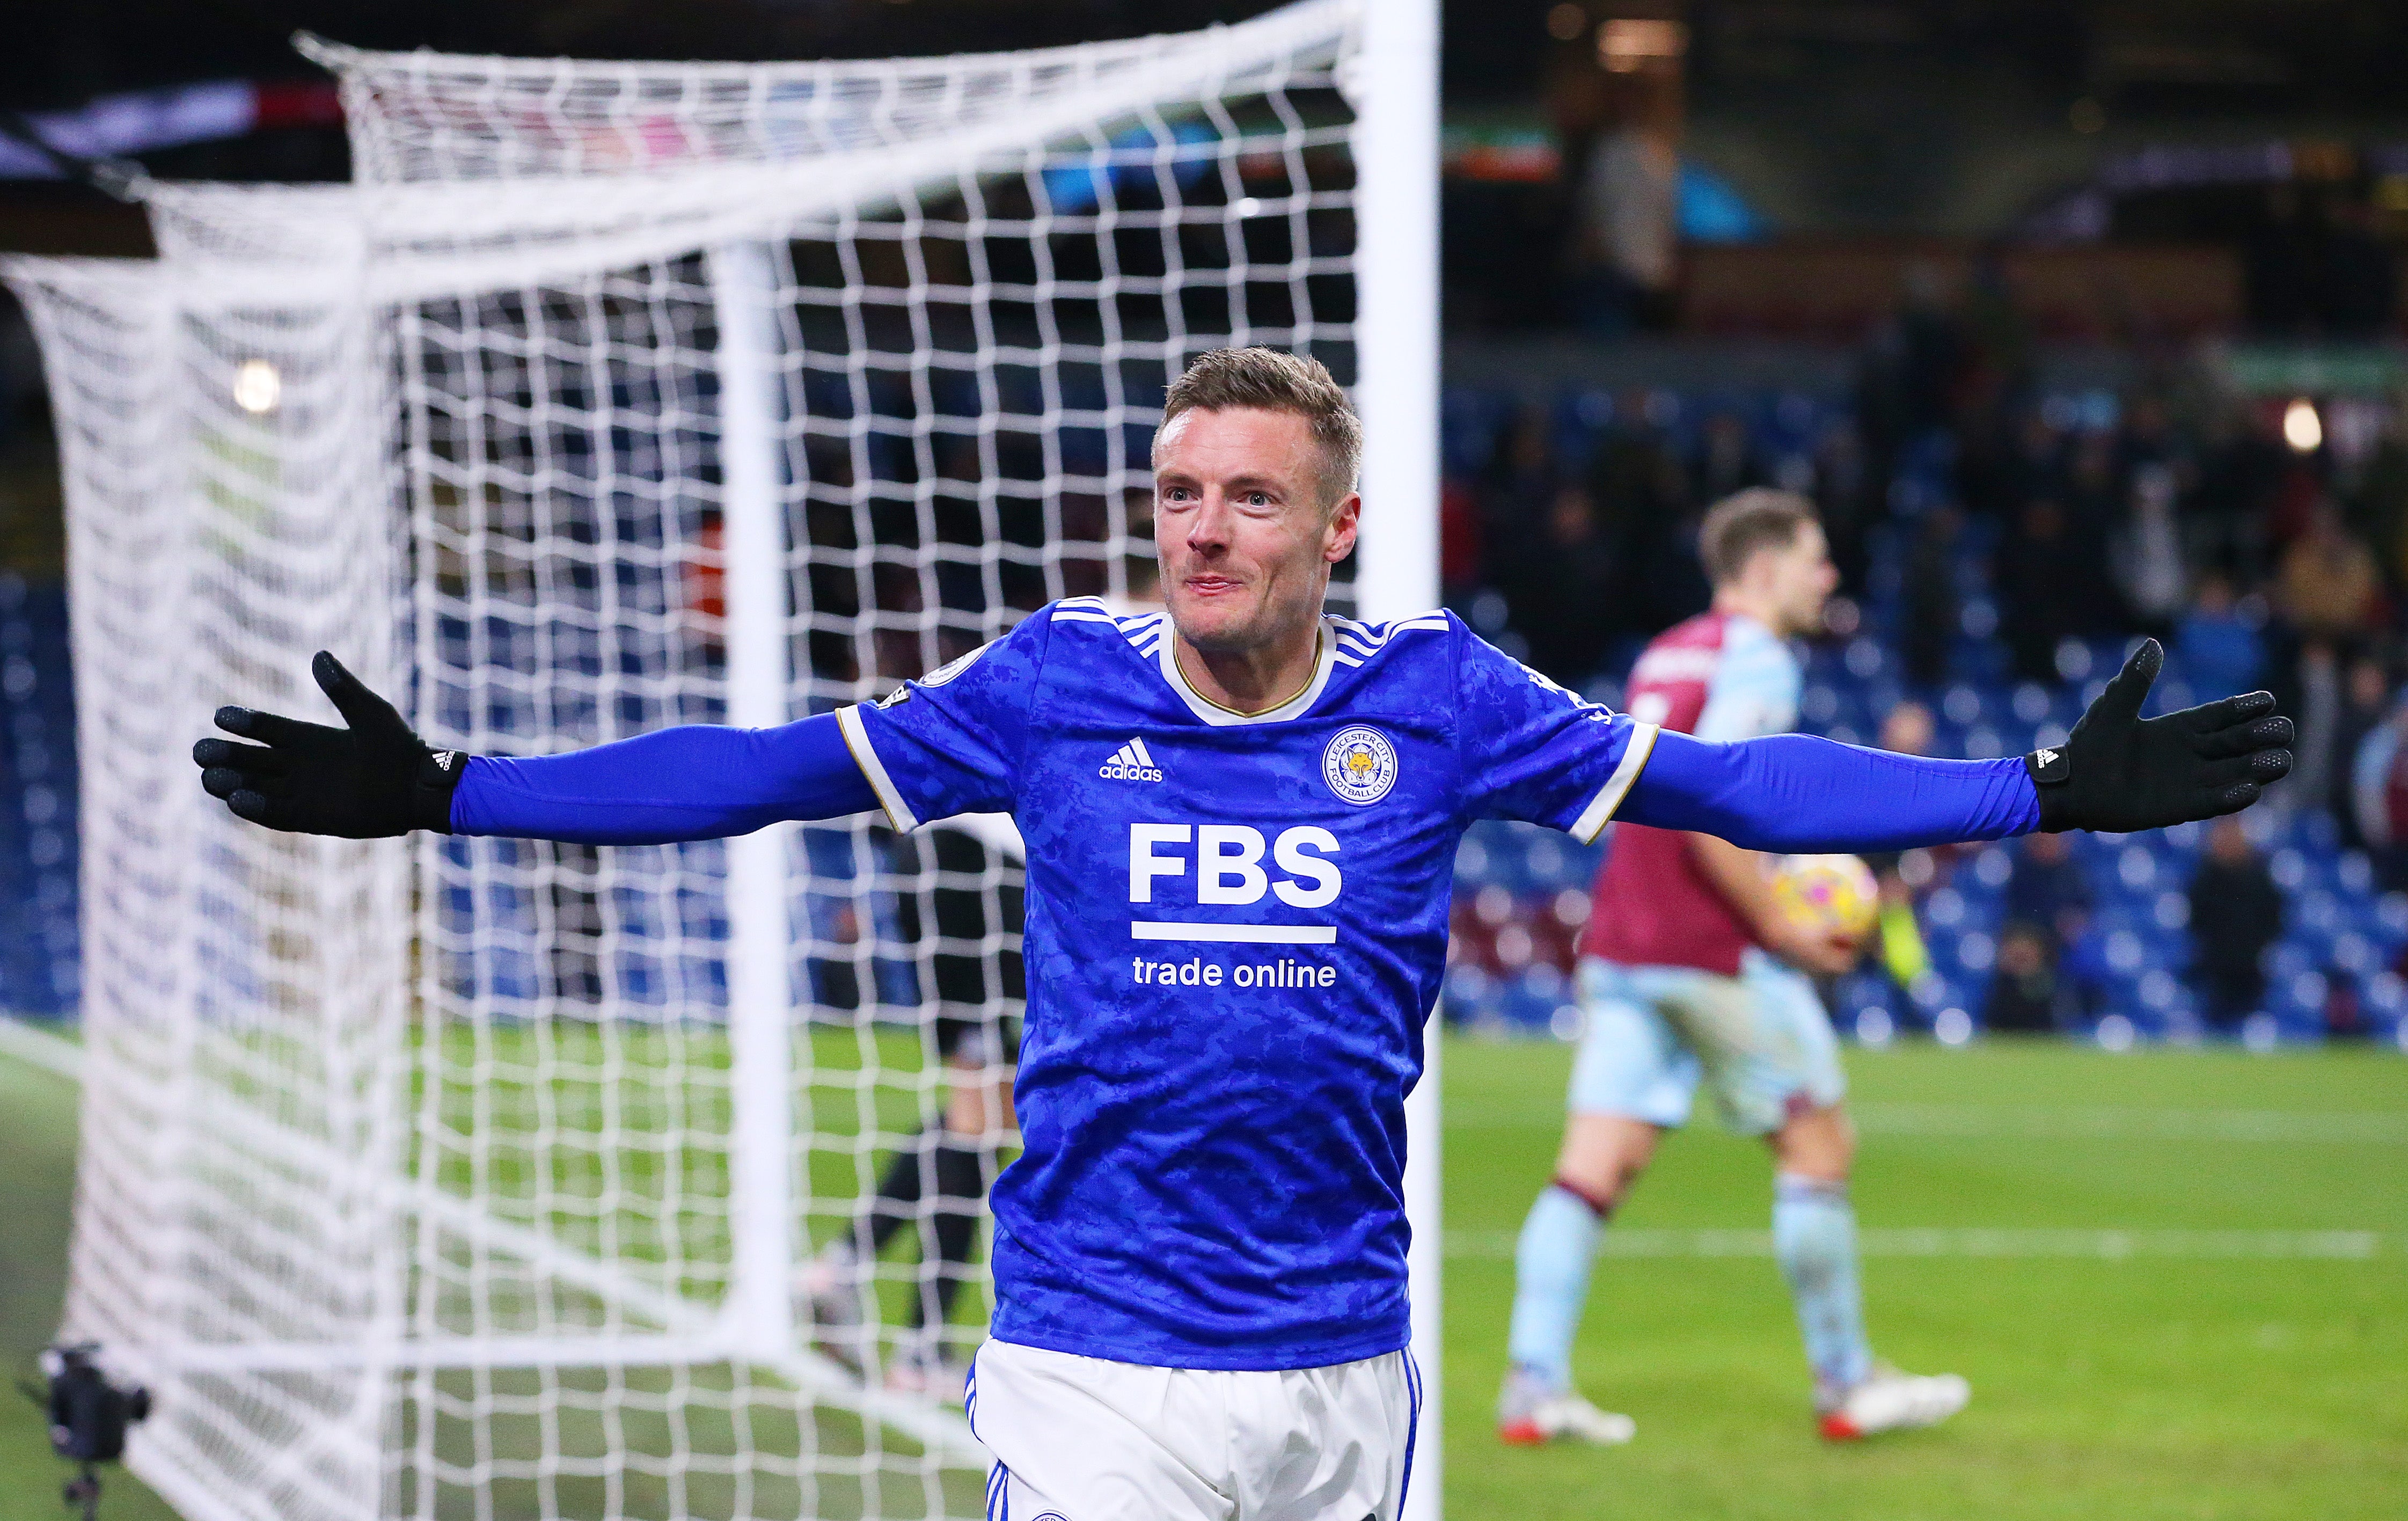 Jamie Vardy made a goalscoring return to action from injury against Burnley